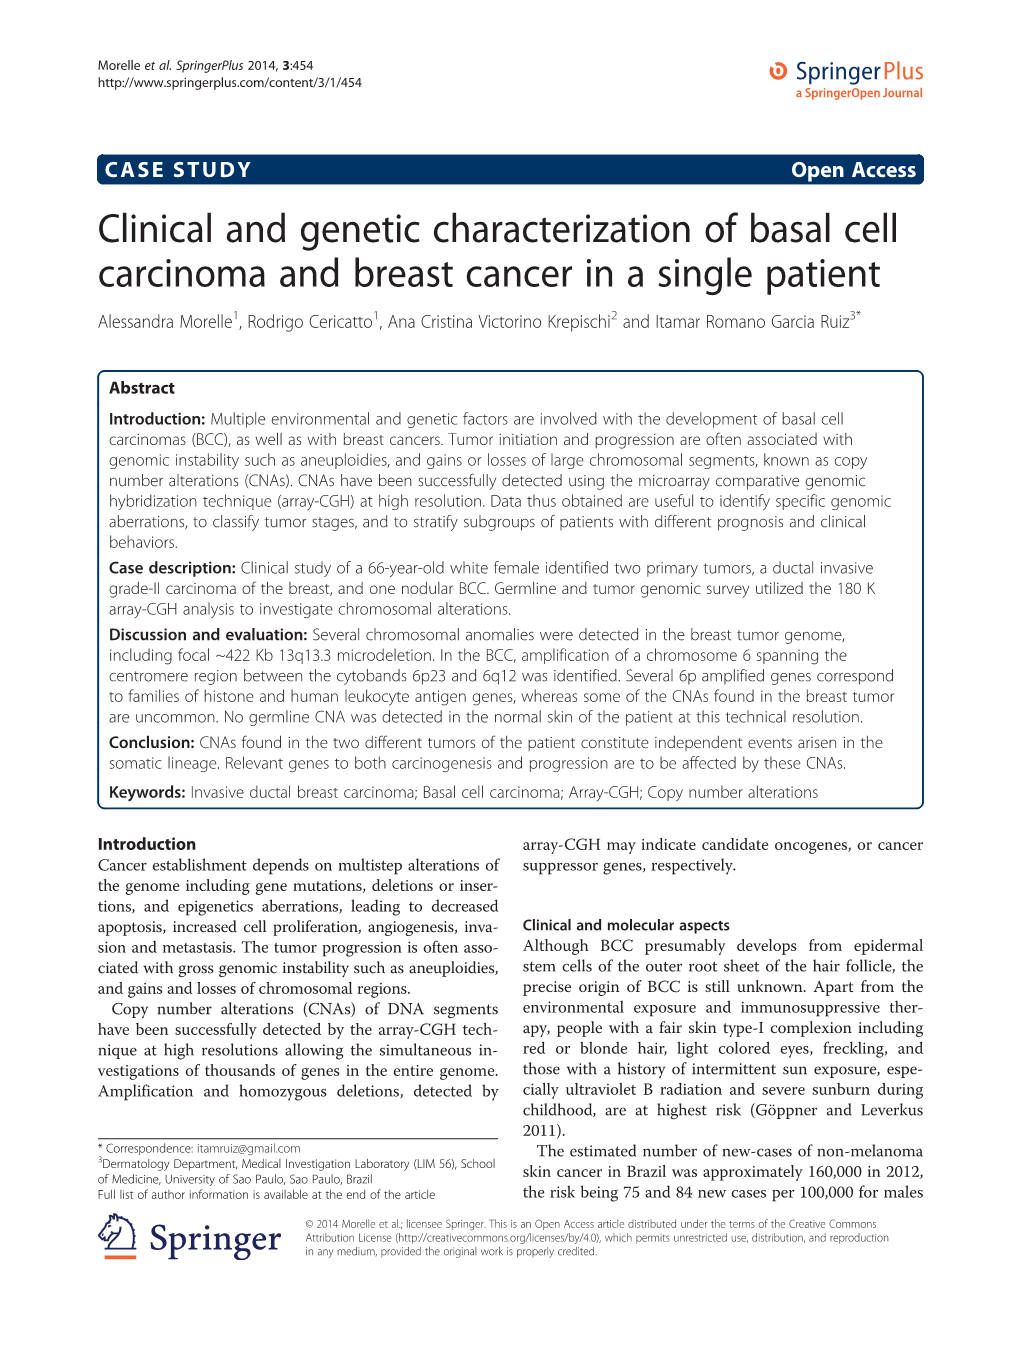 Clinical and Genetic Characterization of Basal Cell Carcinoma and Breast